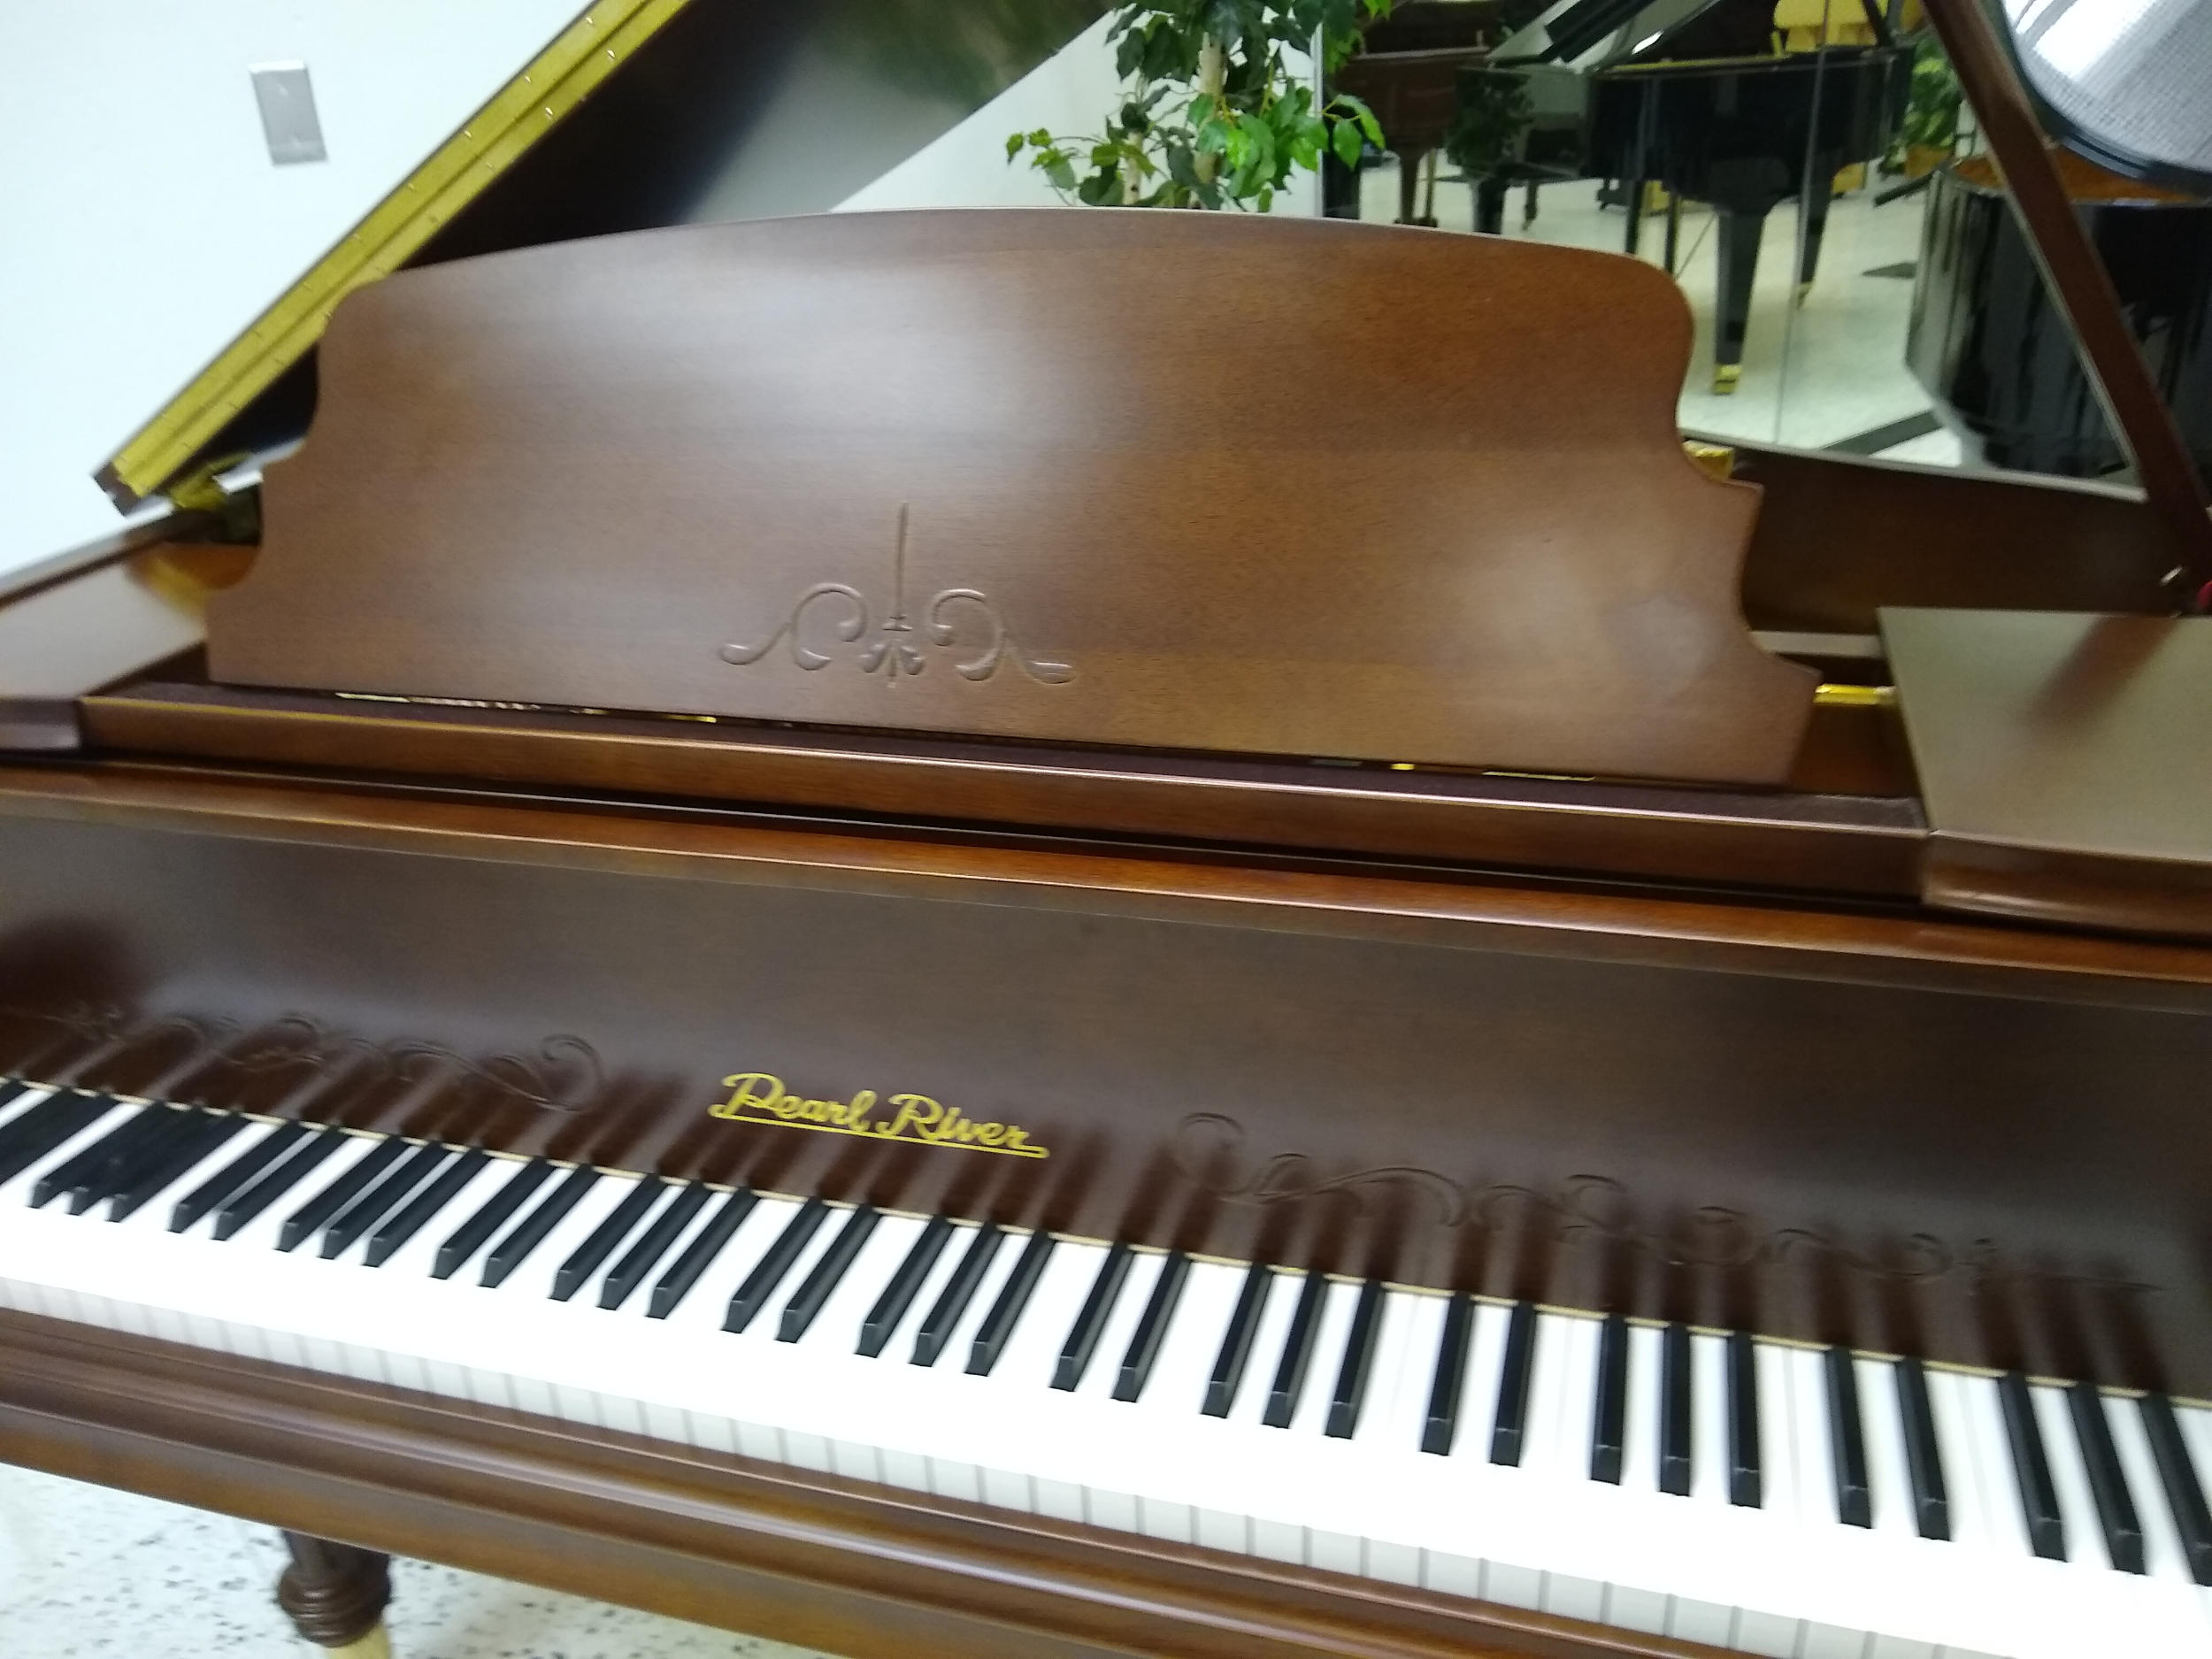 Pearl River Baby Grand Piano Louis Special Edition